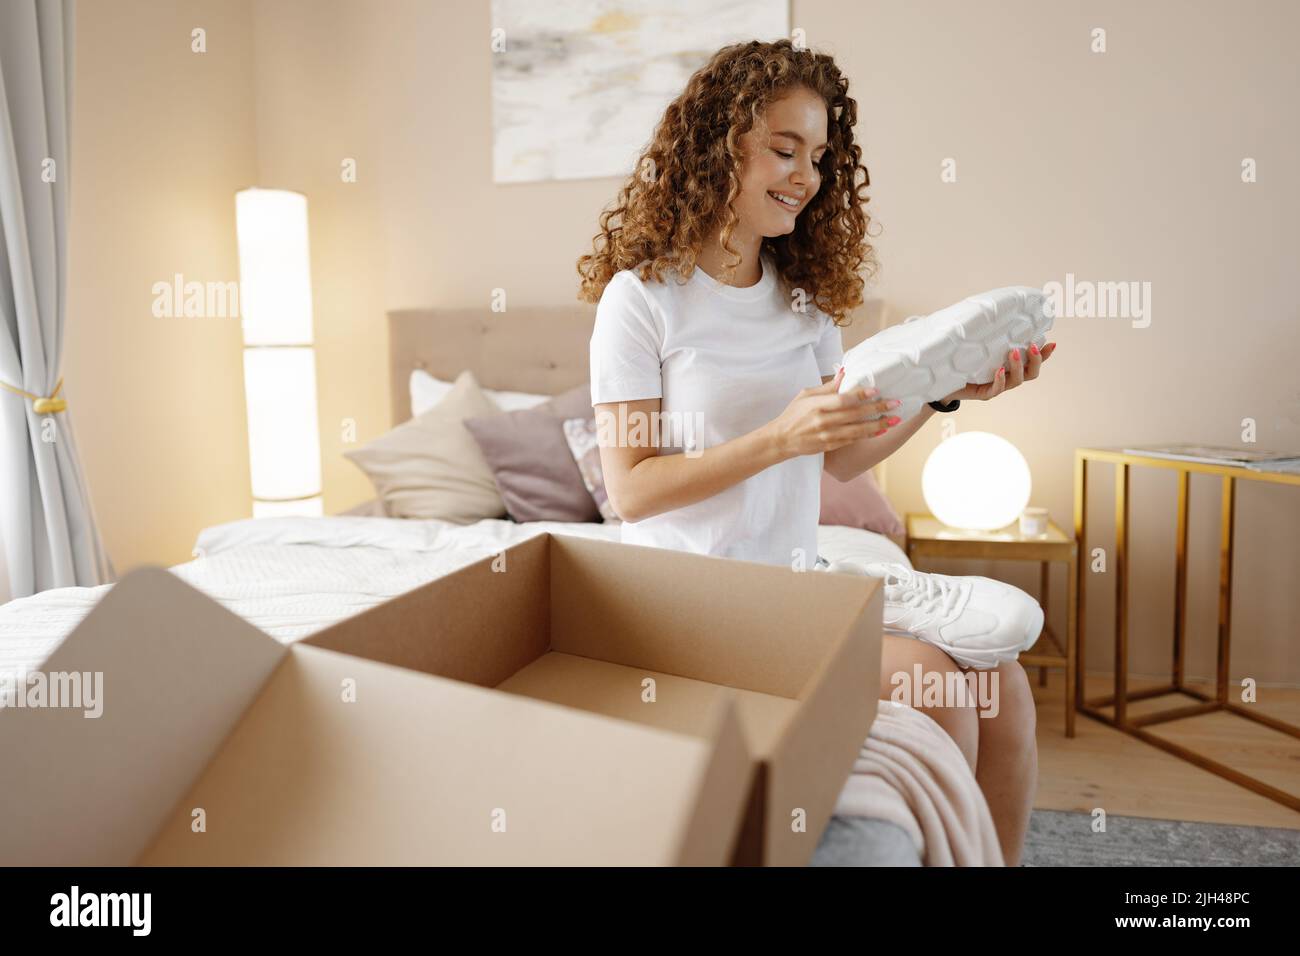 Happy young woman unboxing package in bedroom Stock Photo